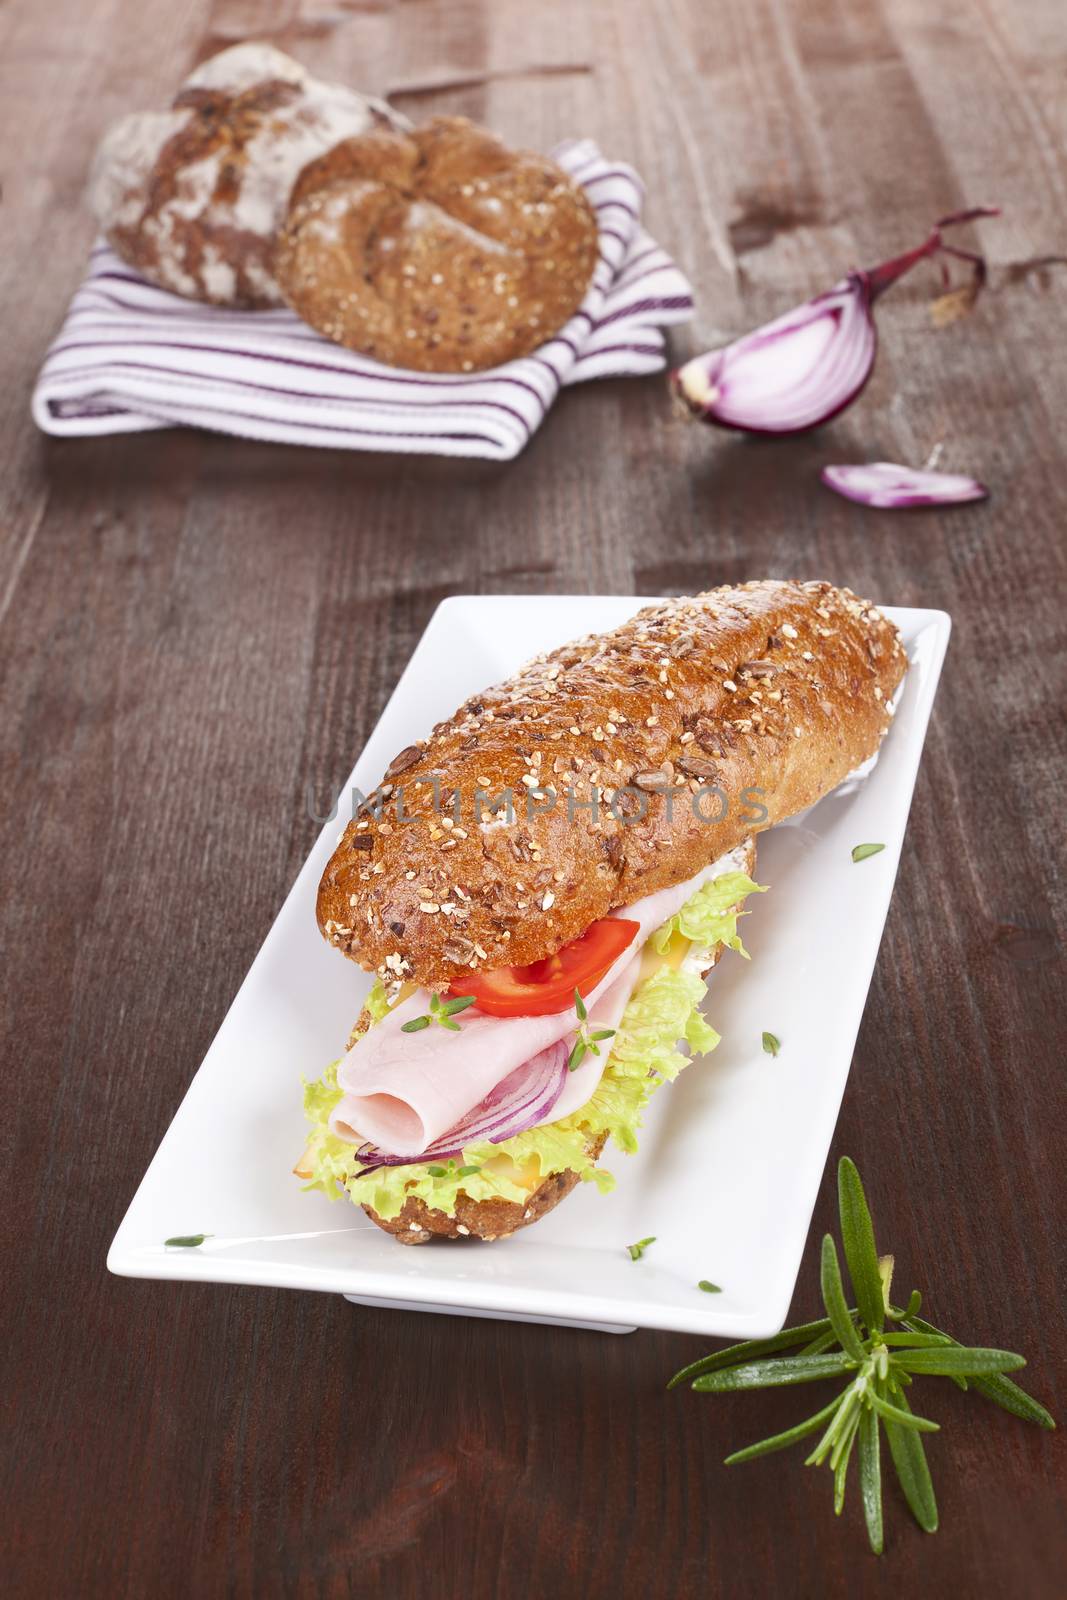 Wholegrain baguette with ham and fresh vegetables, decorated with onion and rosemary on brown wooden background.